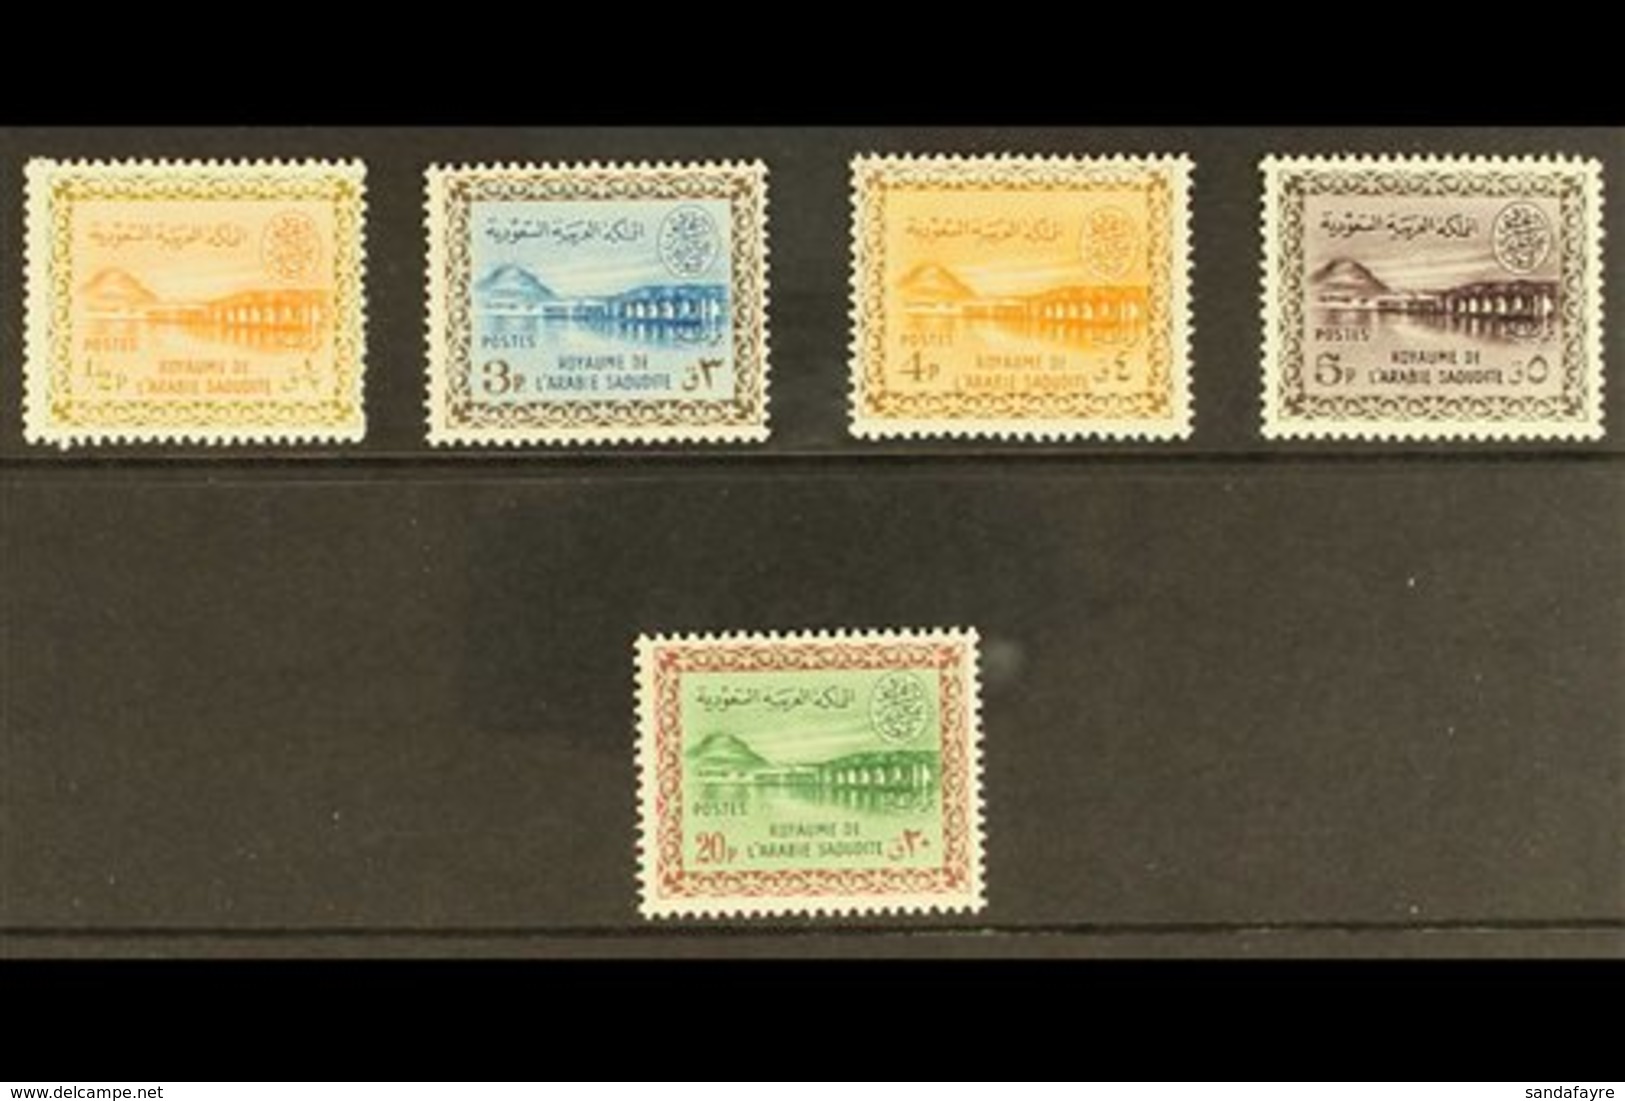 1963 - 65 Wadi Hanifa Dam Set With Wmk Complete, SG 476/80, Very Fine Never Hinged Mint. (5 Stamps) For More Images, Ple - Saudi Arabia